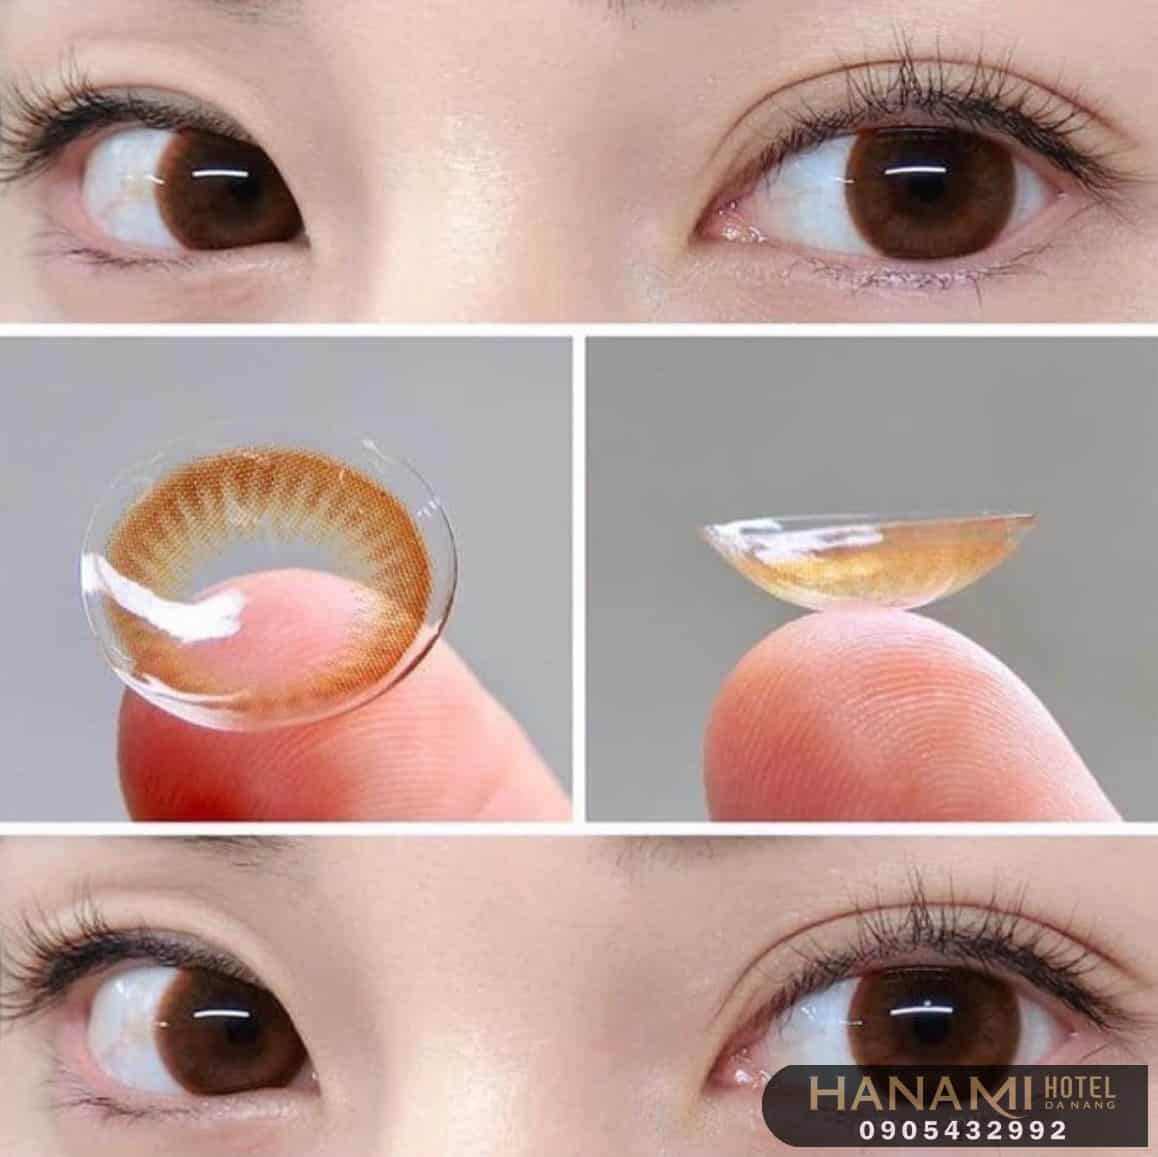 places to buy contact lenses in da nang